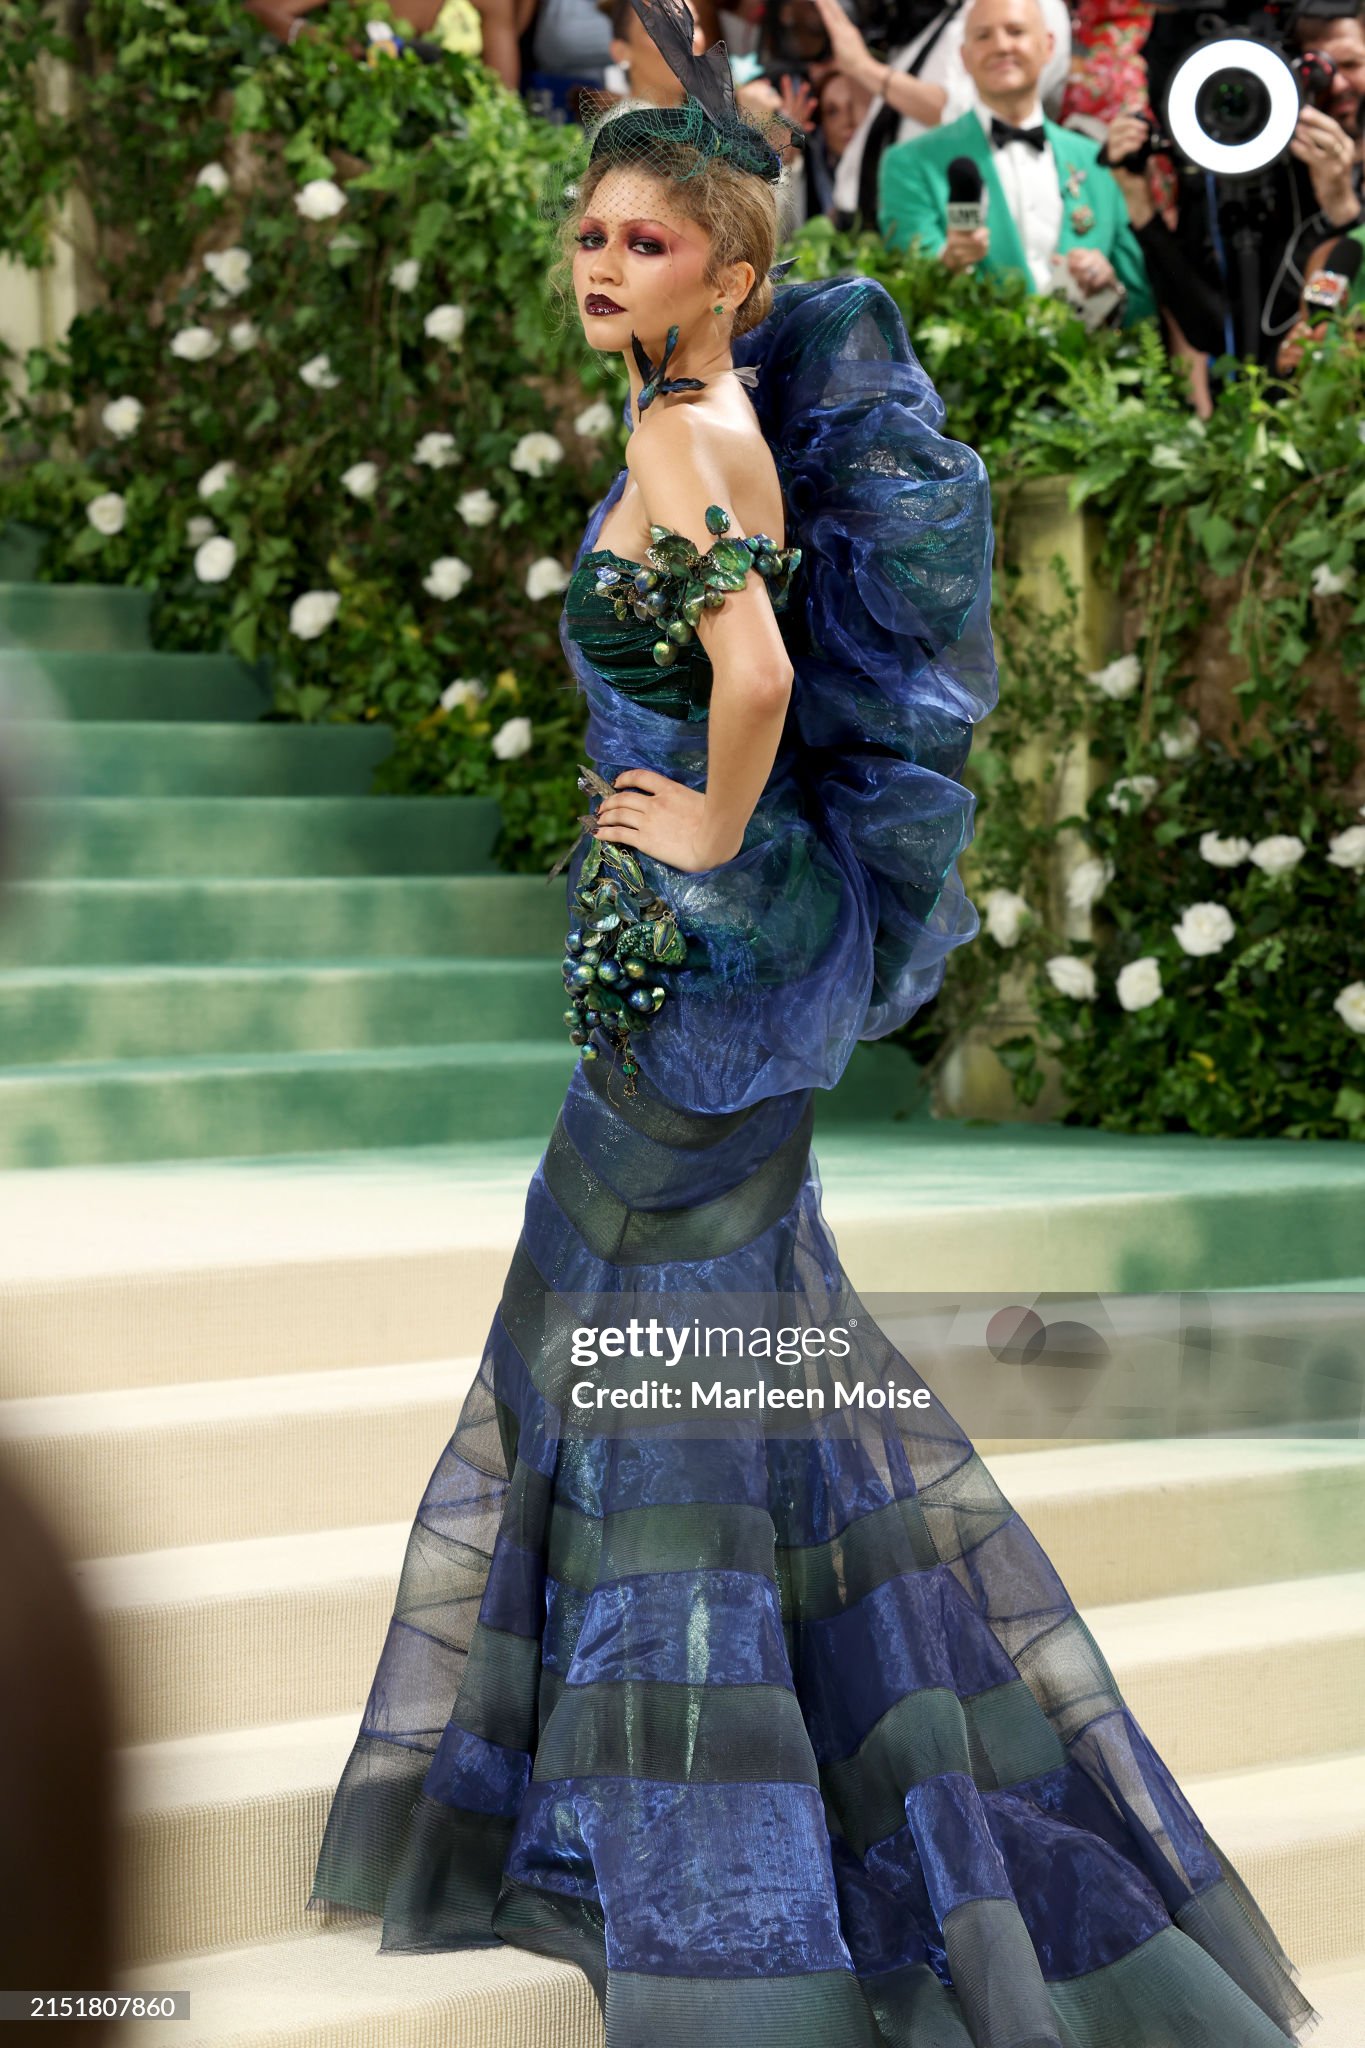 gettyimages-2151807860-2048x2048.jpg